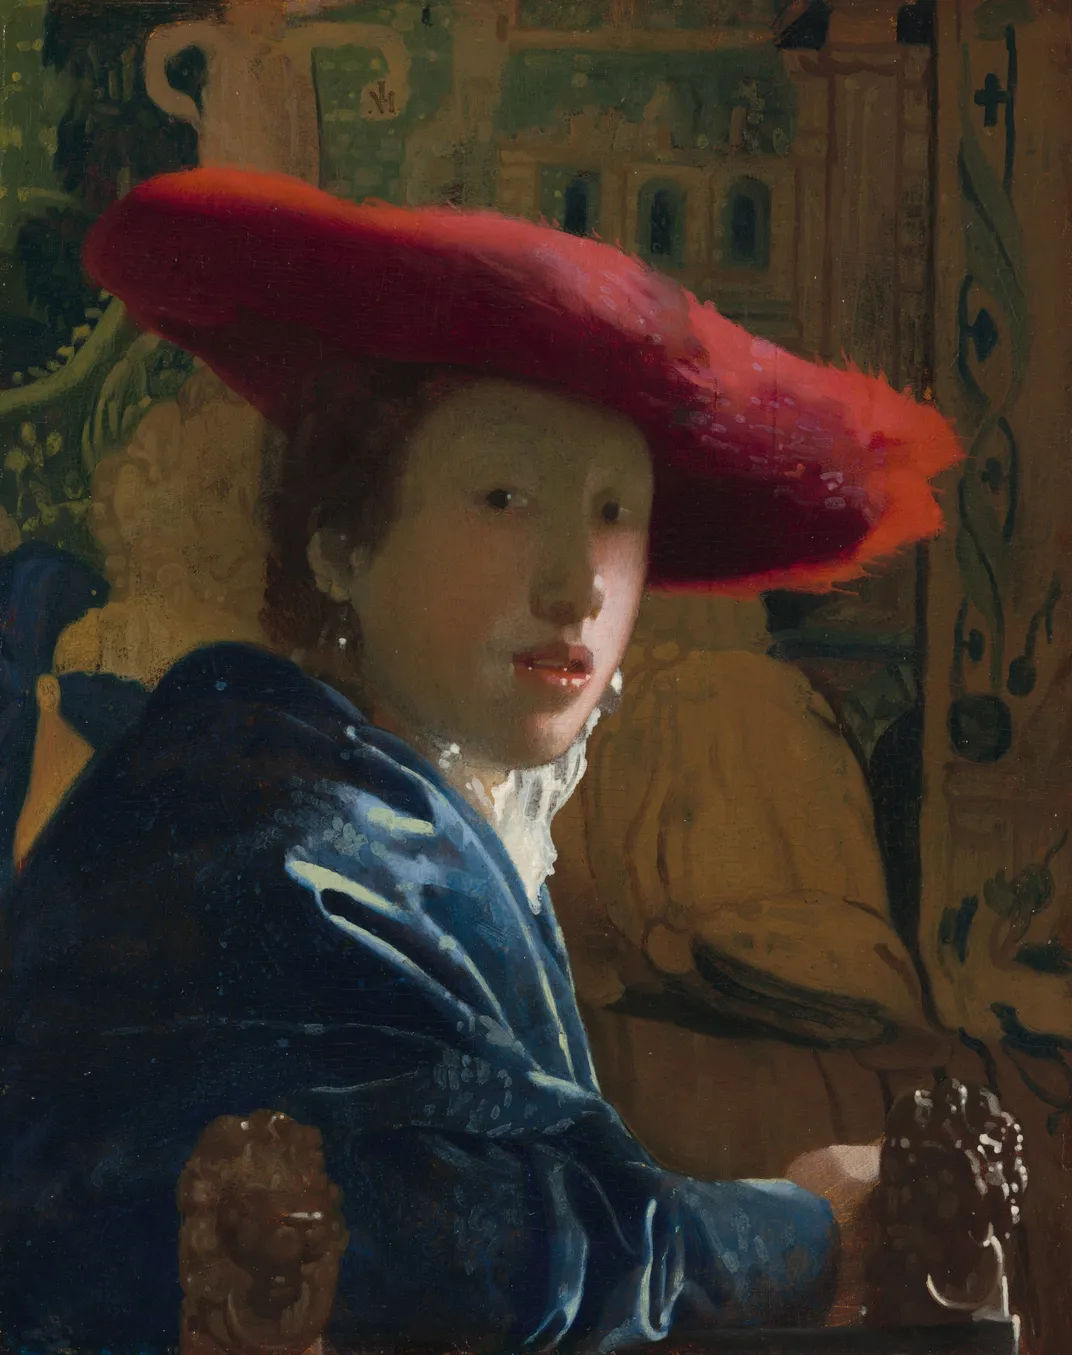 "Girl with the Red Hat" by Johannes Vermeer